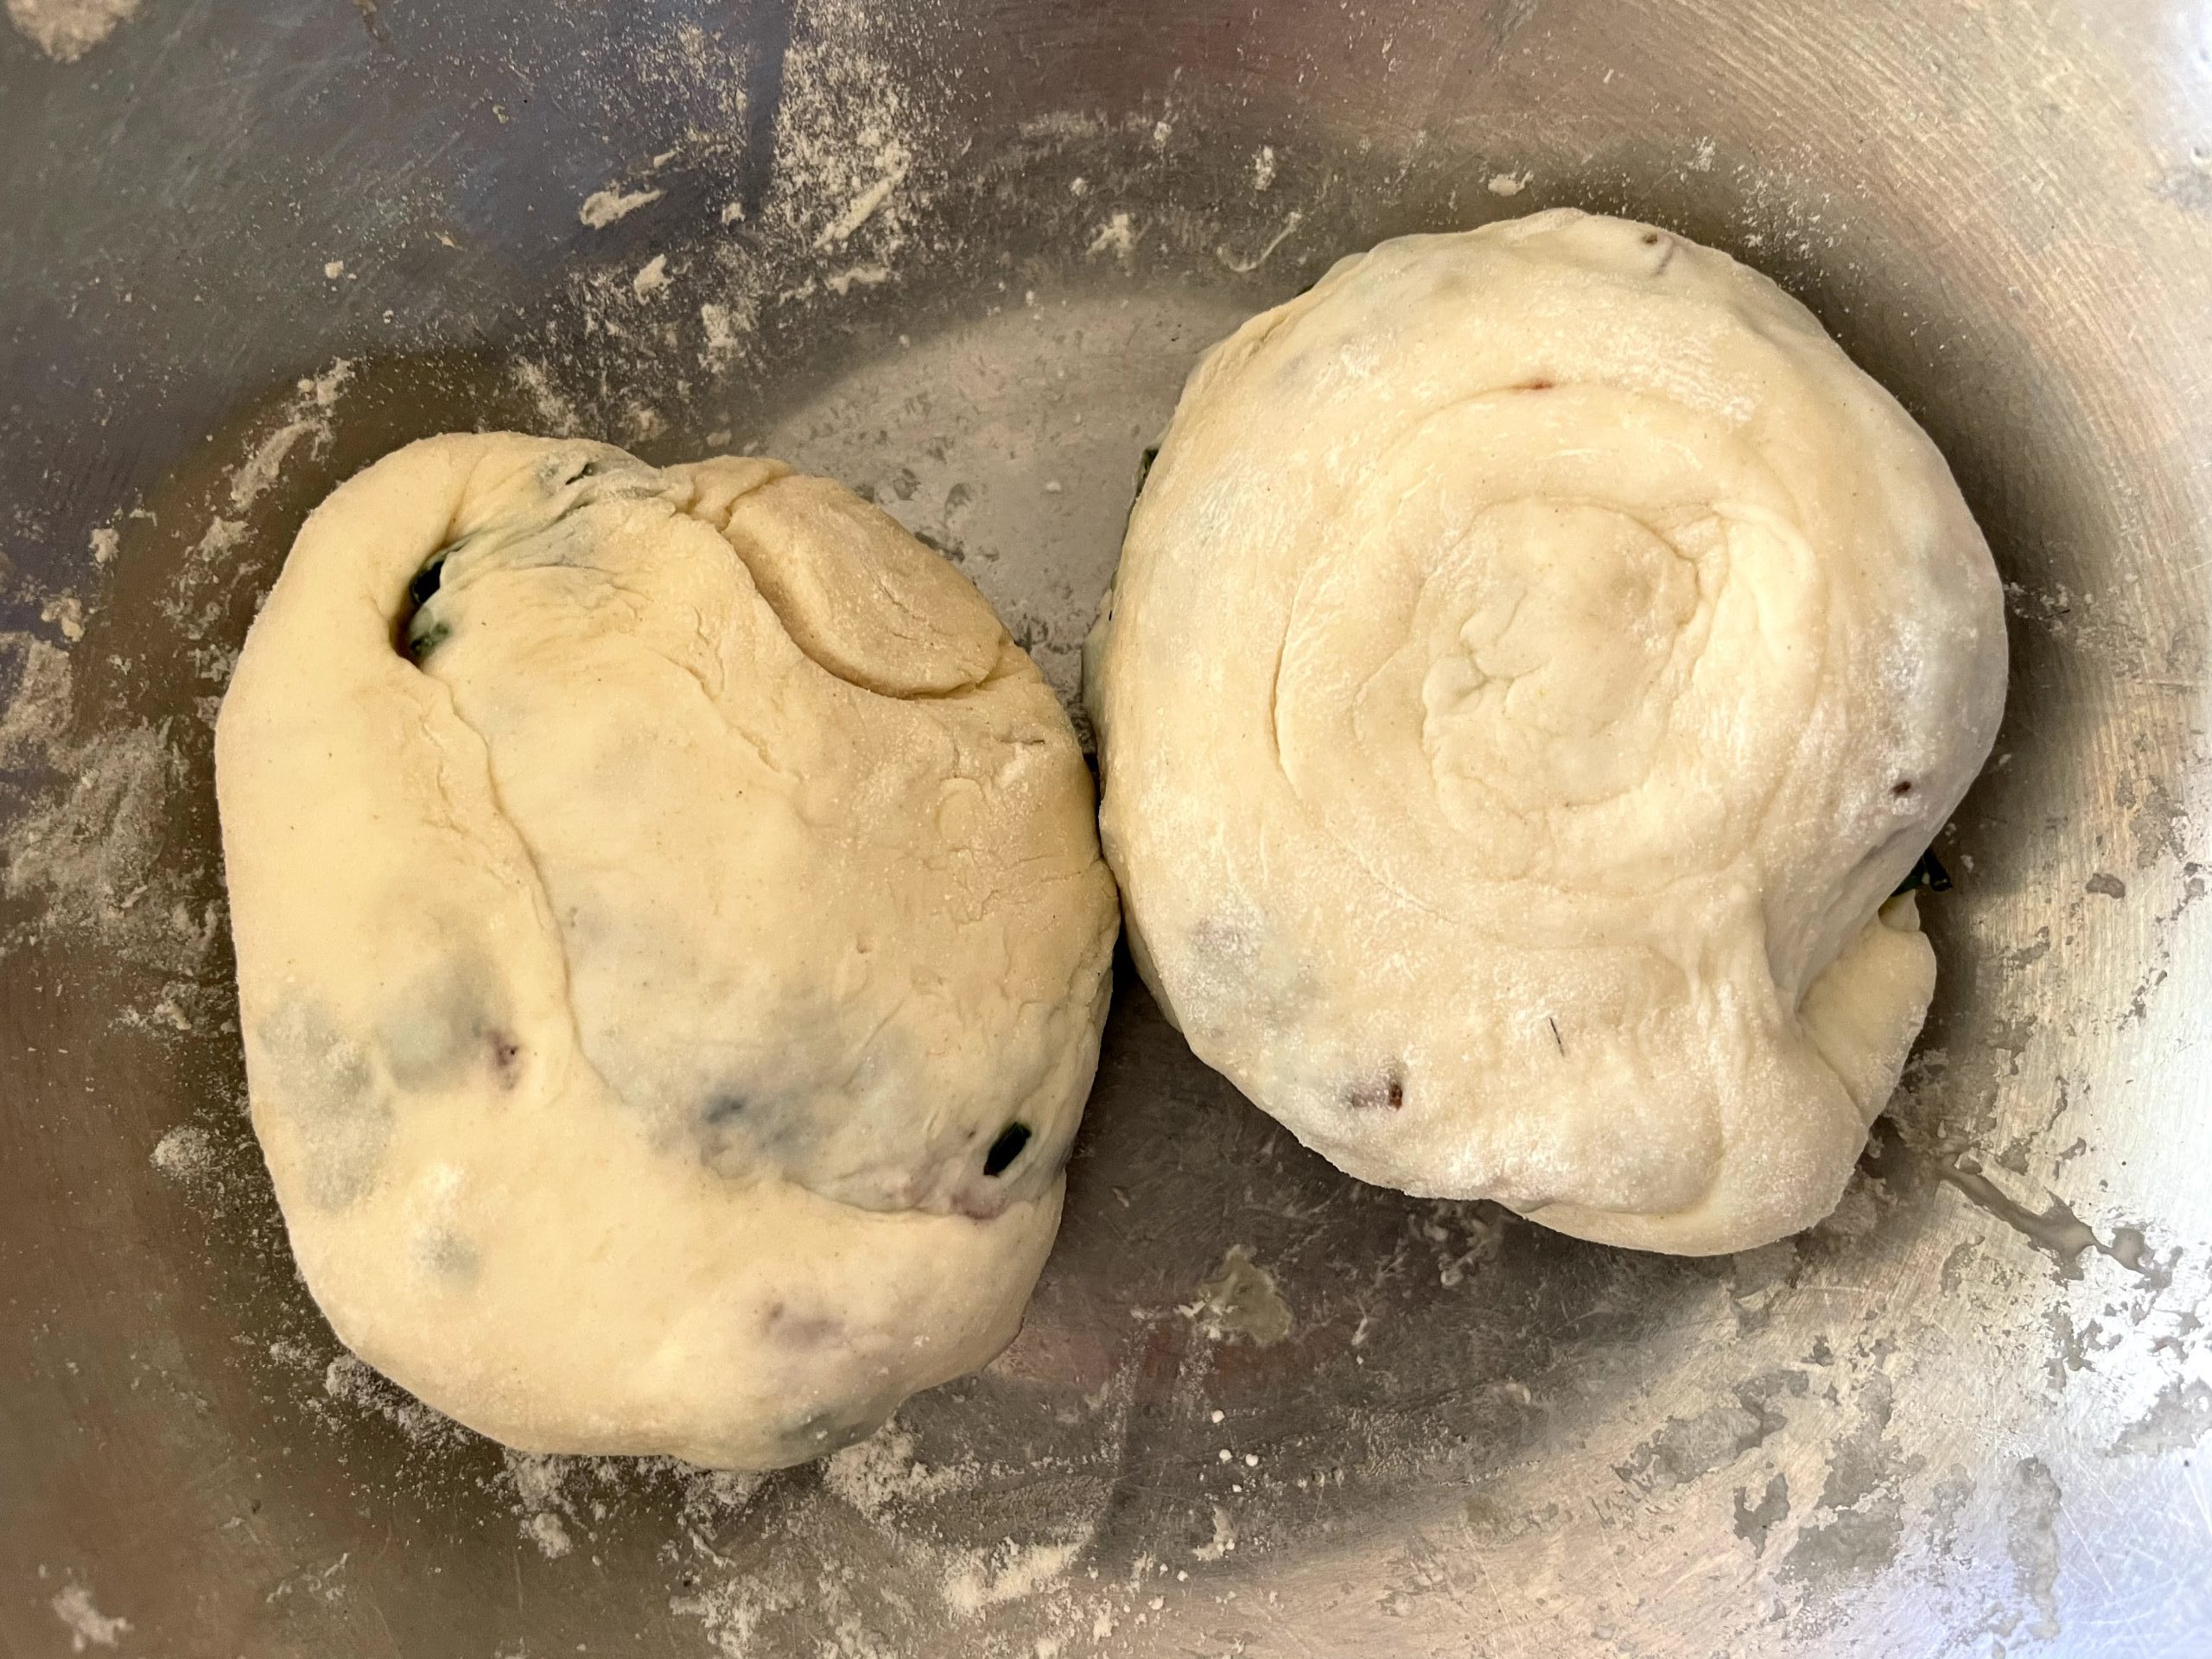 Allow the dough to rest for at least 1/2 hour.